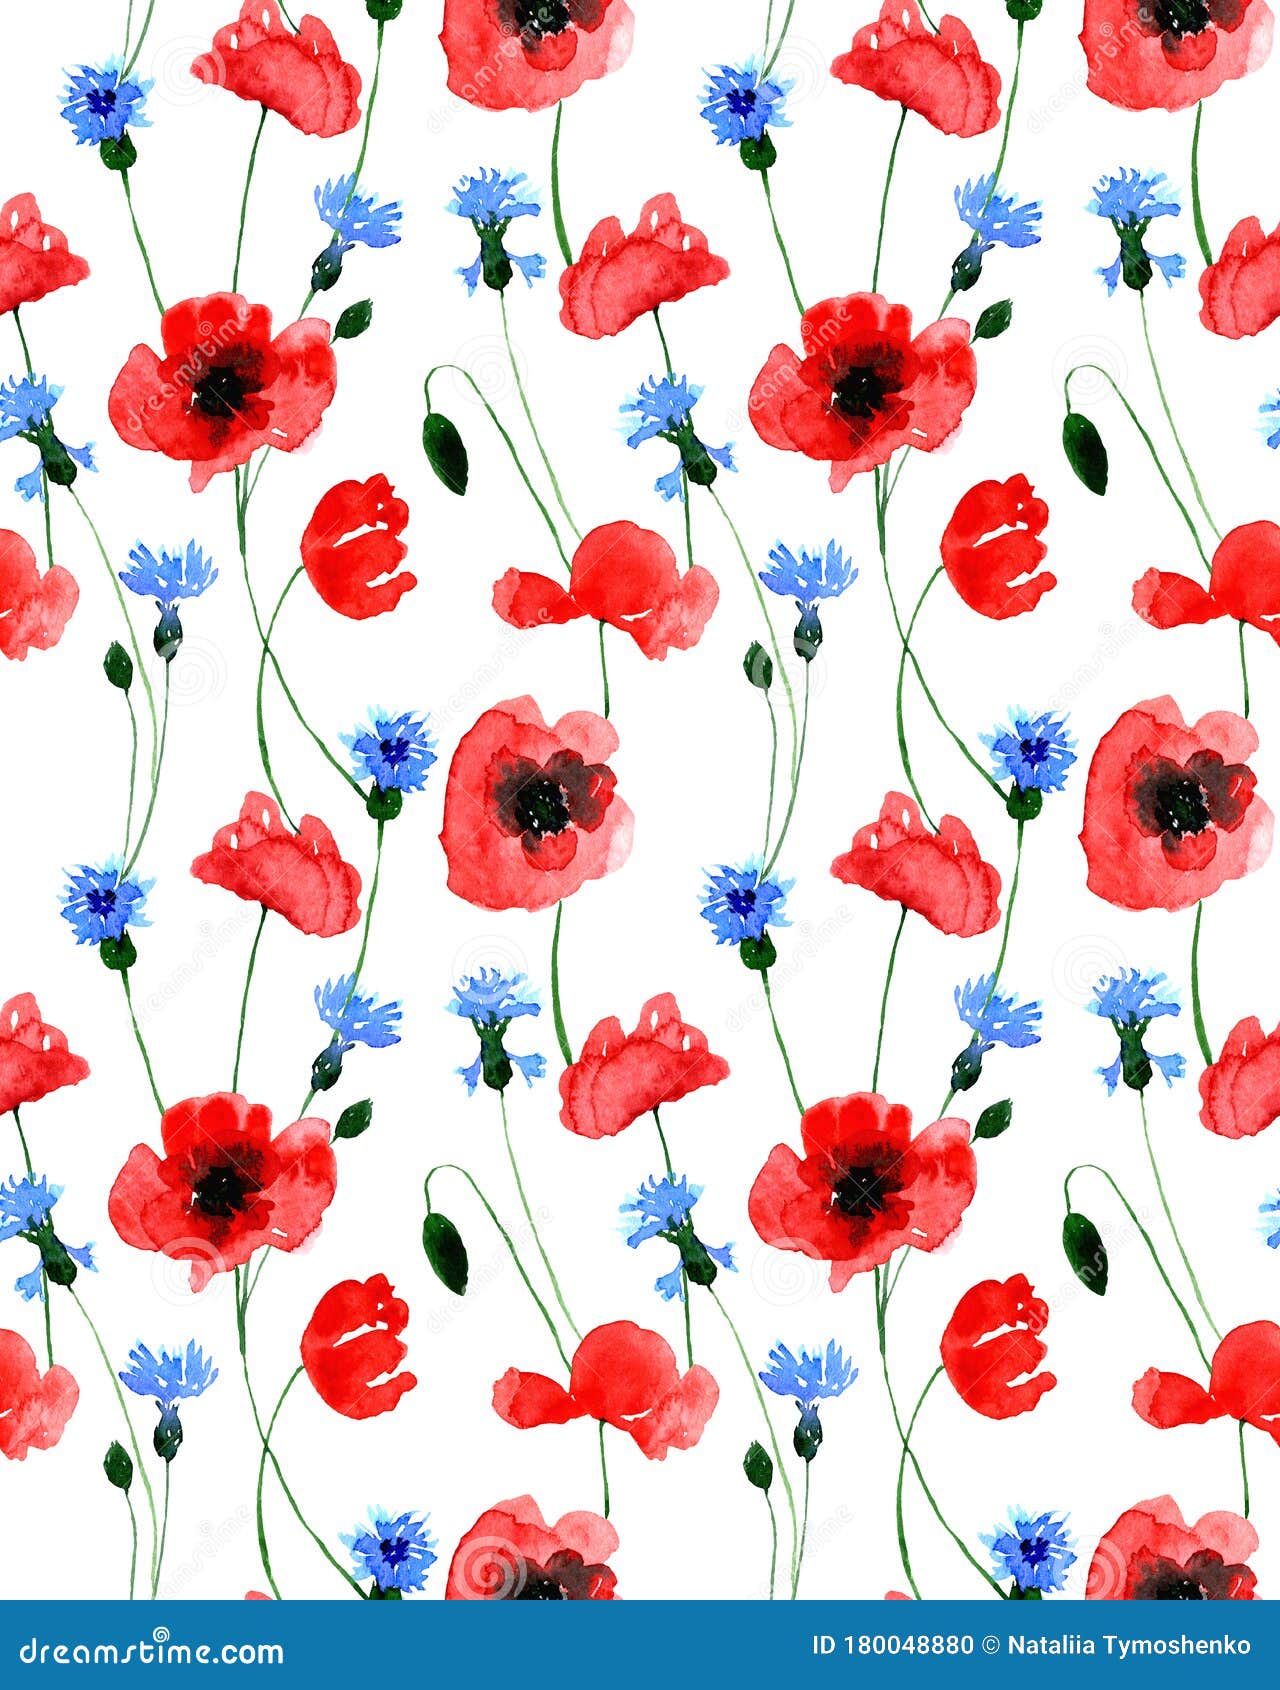 Watercolor Seamless Wild Field Poppy And Cornflower Flower Pattern Endless Print For Textile Clothes Fashion Linens Dress Stock Illustration Illustration Of Beautiful Flora 180048880